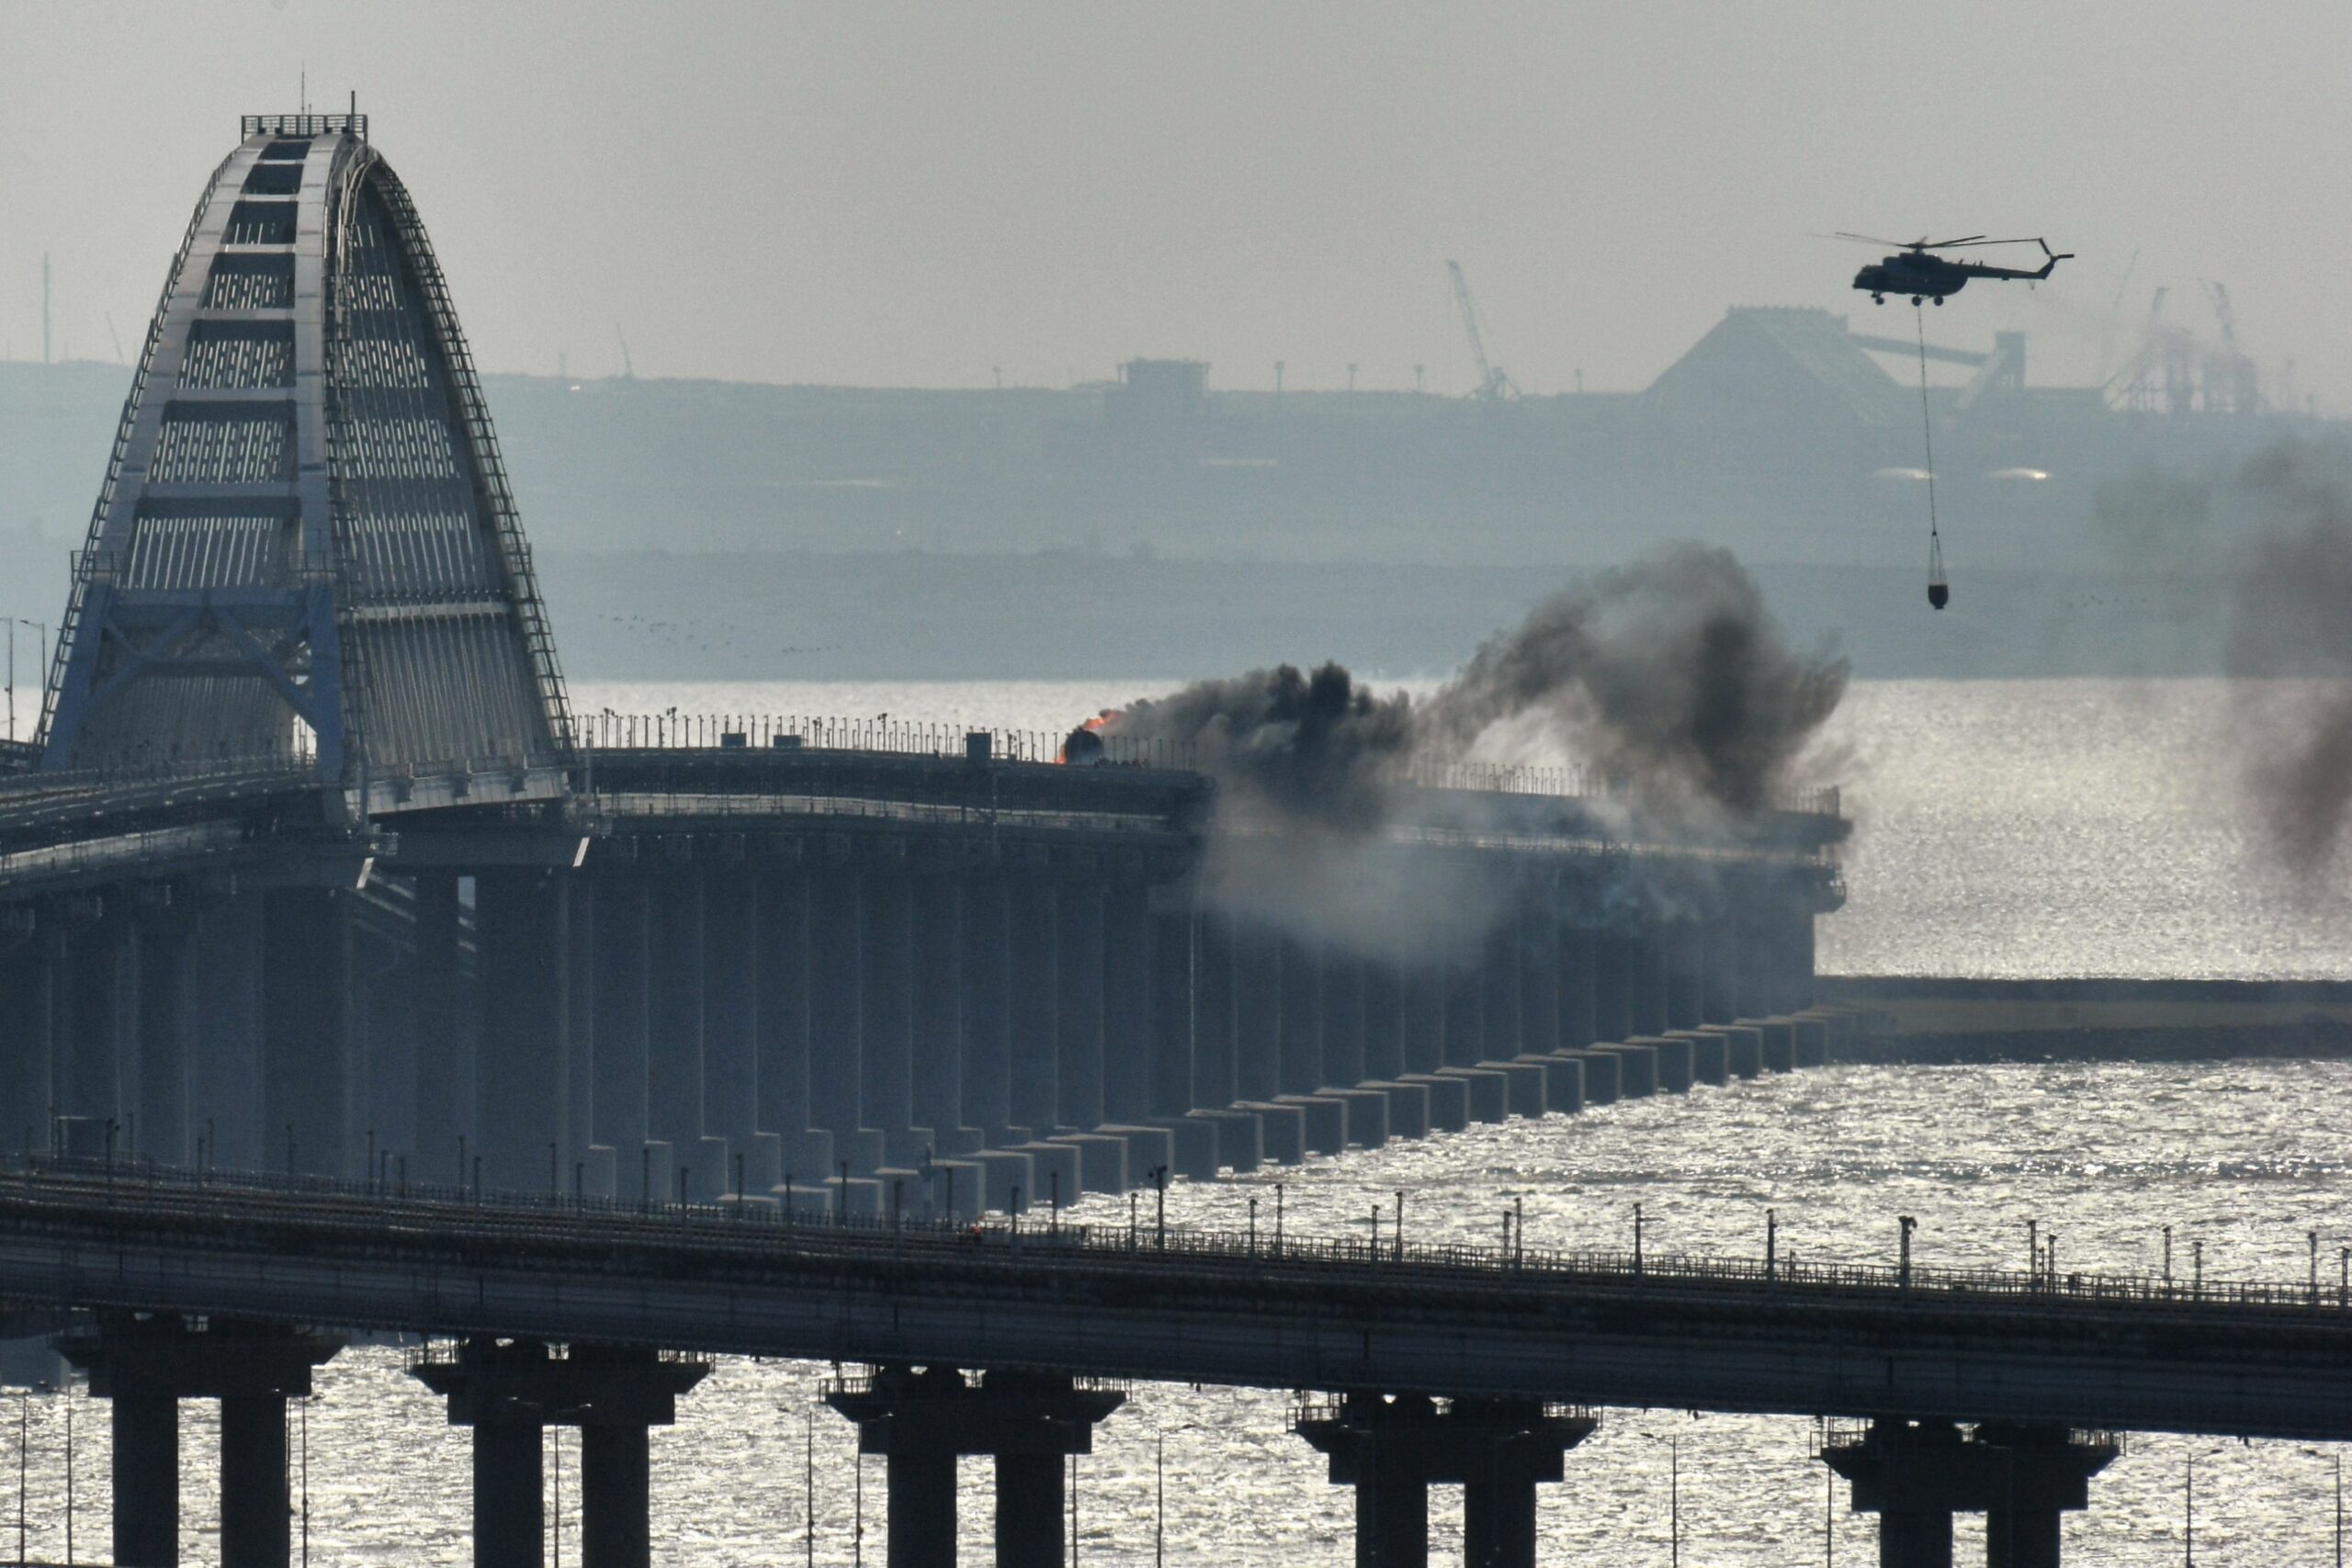 8291785 08.10.2022 A helicopter drops water to stop fire on Crimean Bridge connecting Russian mainland and Crimean peninsula over the Kerch Strait, in Crimea, Russia. Russia's National Antiterrorism Committee (NAC) said on Saturday that a truck was blown up on the Crimean Bridge, which caused an inflammation of seven fuel tanks of a railway train and a partial collapse of two car spans. The traffic and movement of trains across the Kerch Strait was temporarily suspended. The movement of ships in the Kerch Strait did not stop despite a fire on the bridge. Konstantin Mihalchevskiy / Sputnik